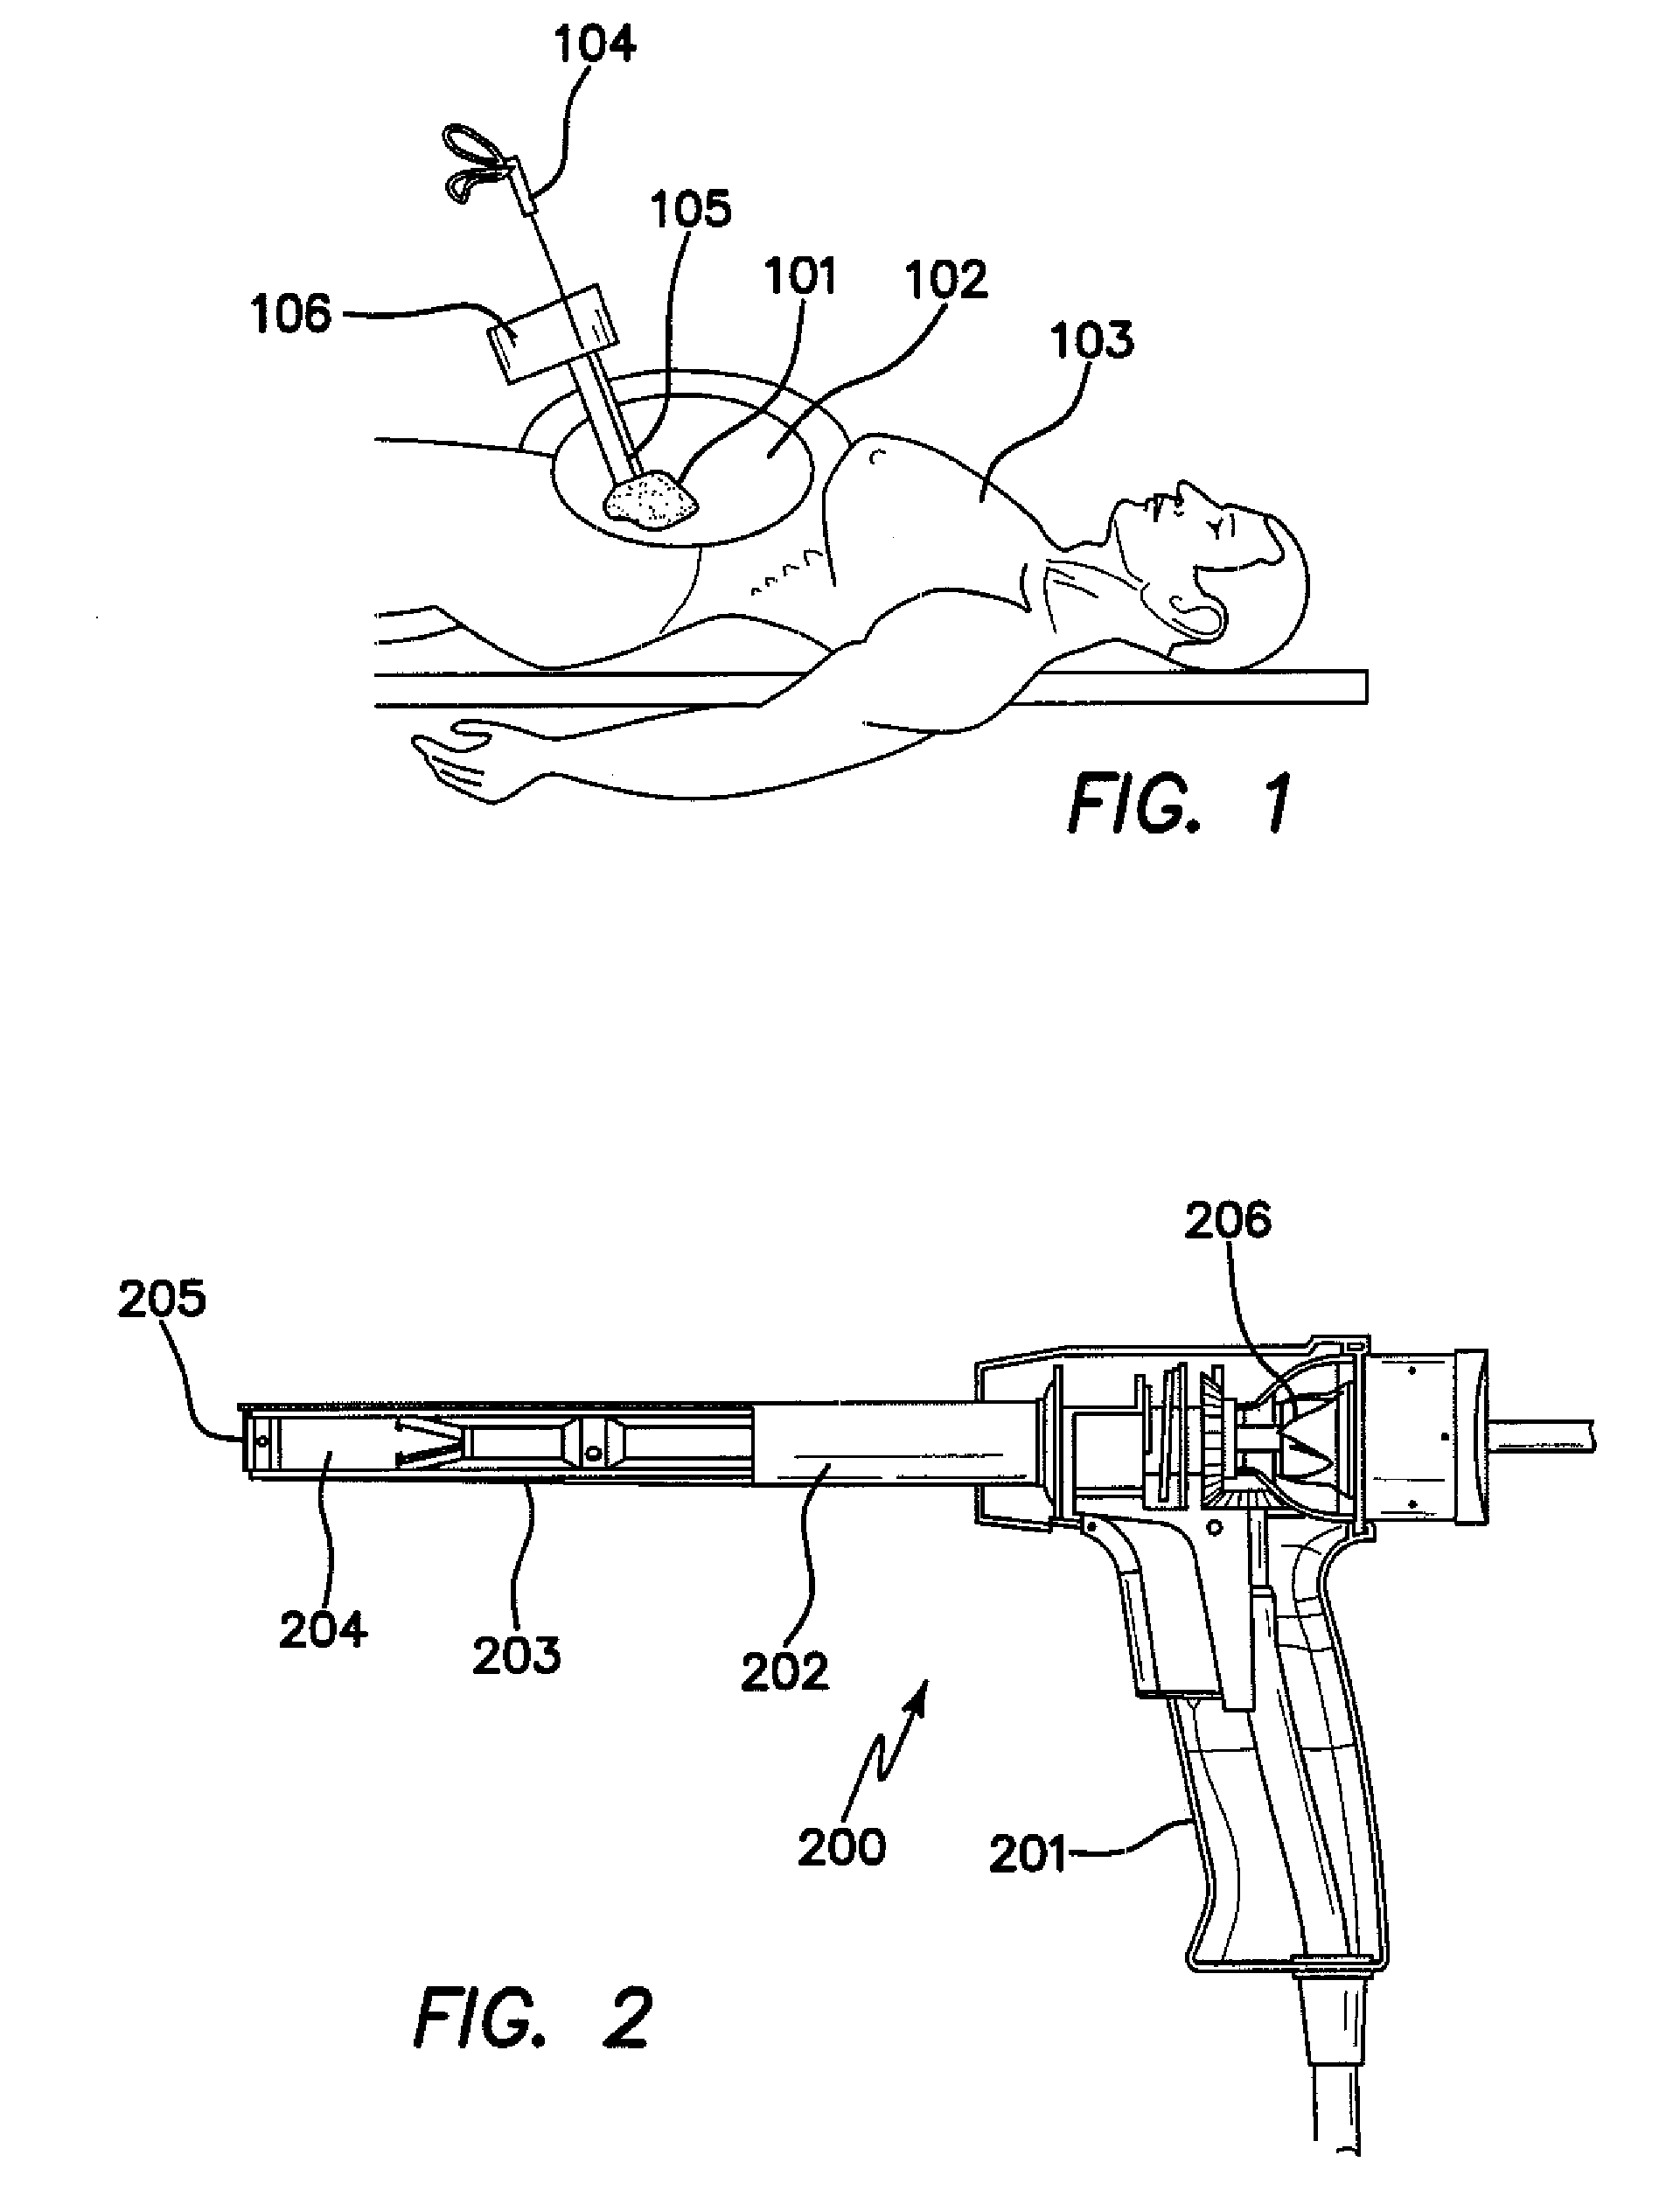 Method and apparatus for tissue morcellation